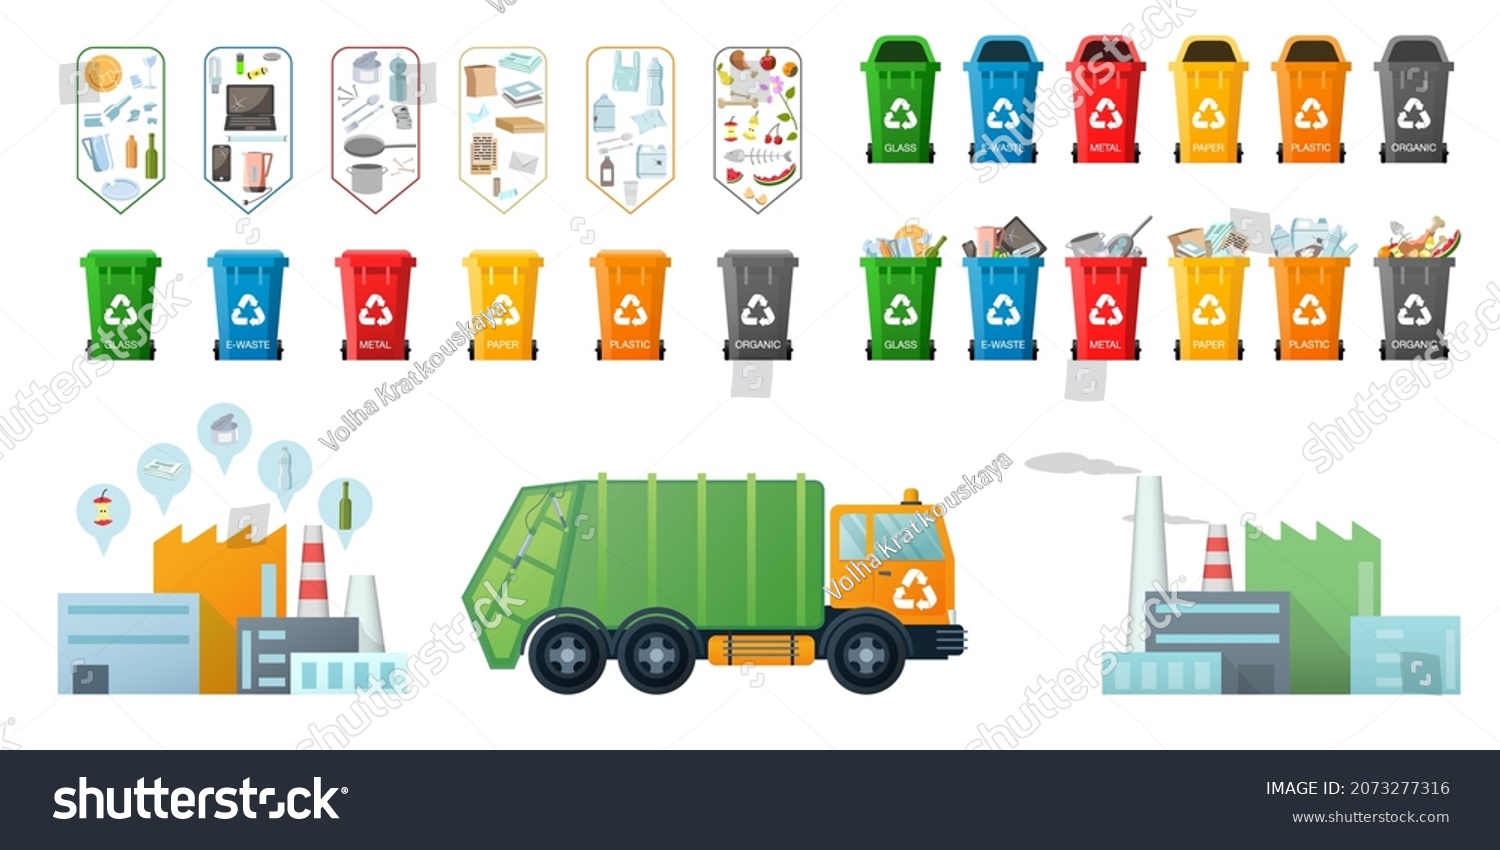 SVG of Garbage collection. Plastic bins, truck for garbage and waste incineration plants. Waste Factory, truck, containers. Different types of trash: Organic, Plastic, Metal, Paper, Glass, E-waste. Vector svg